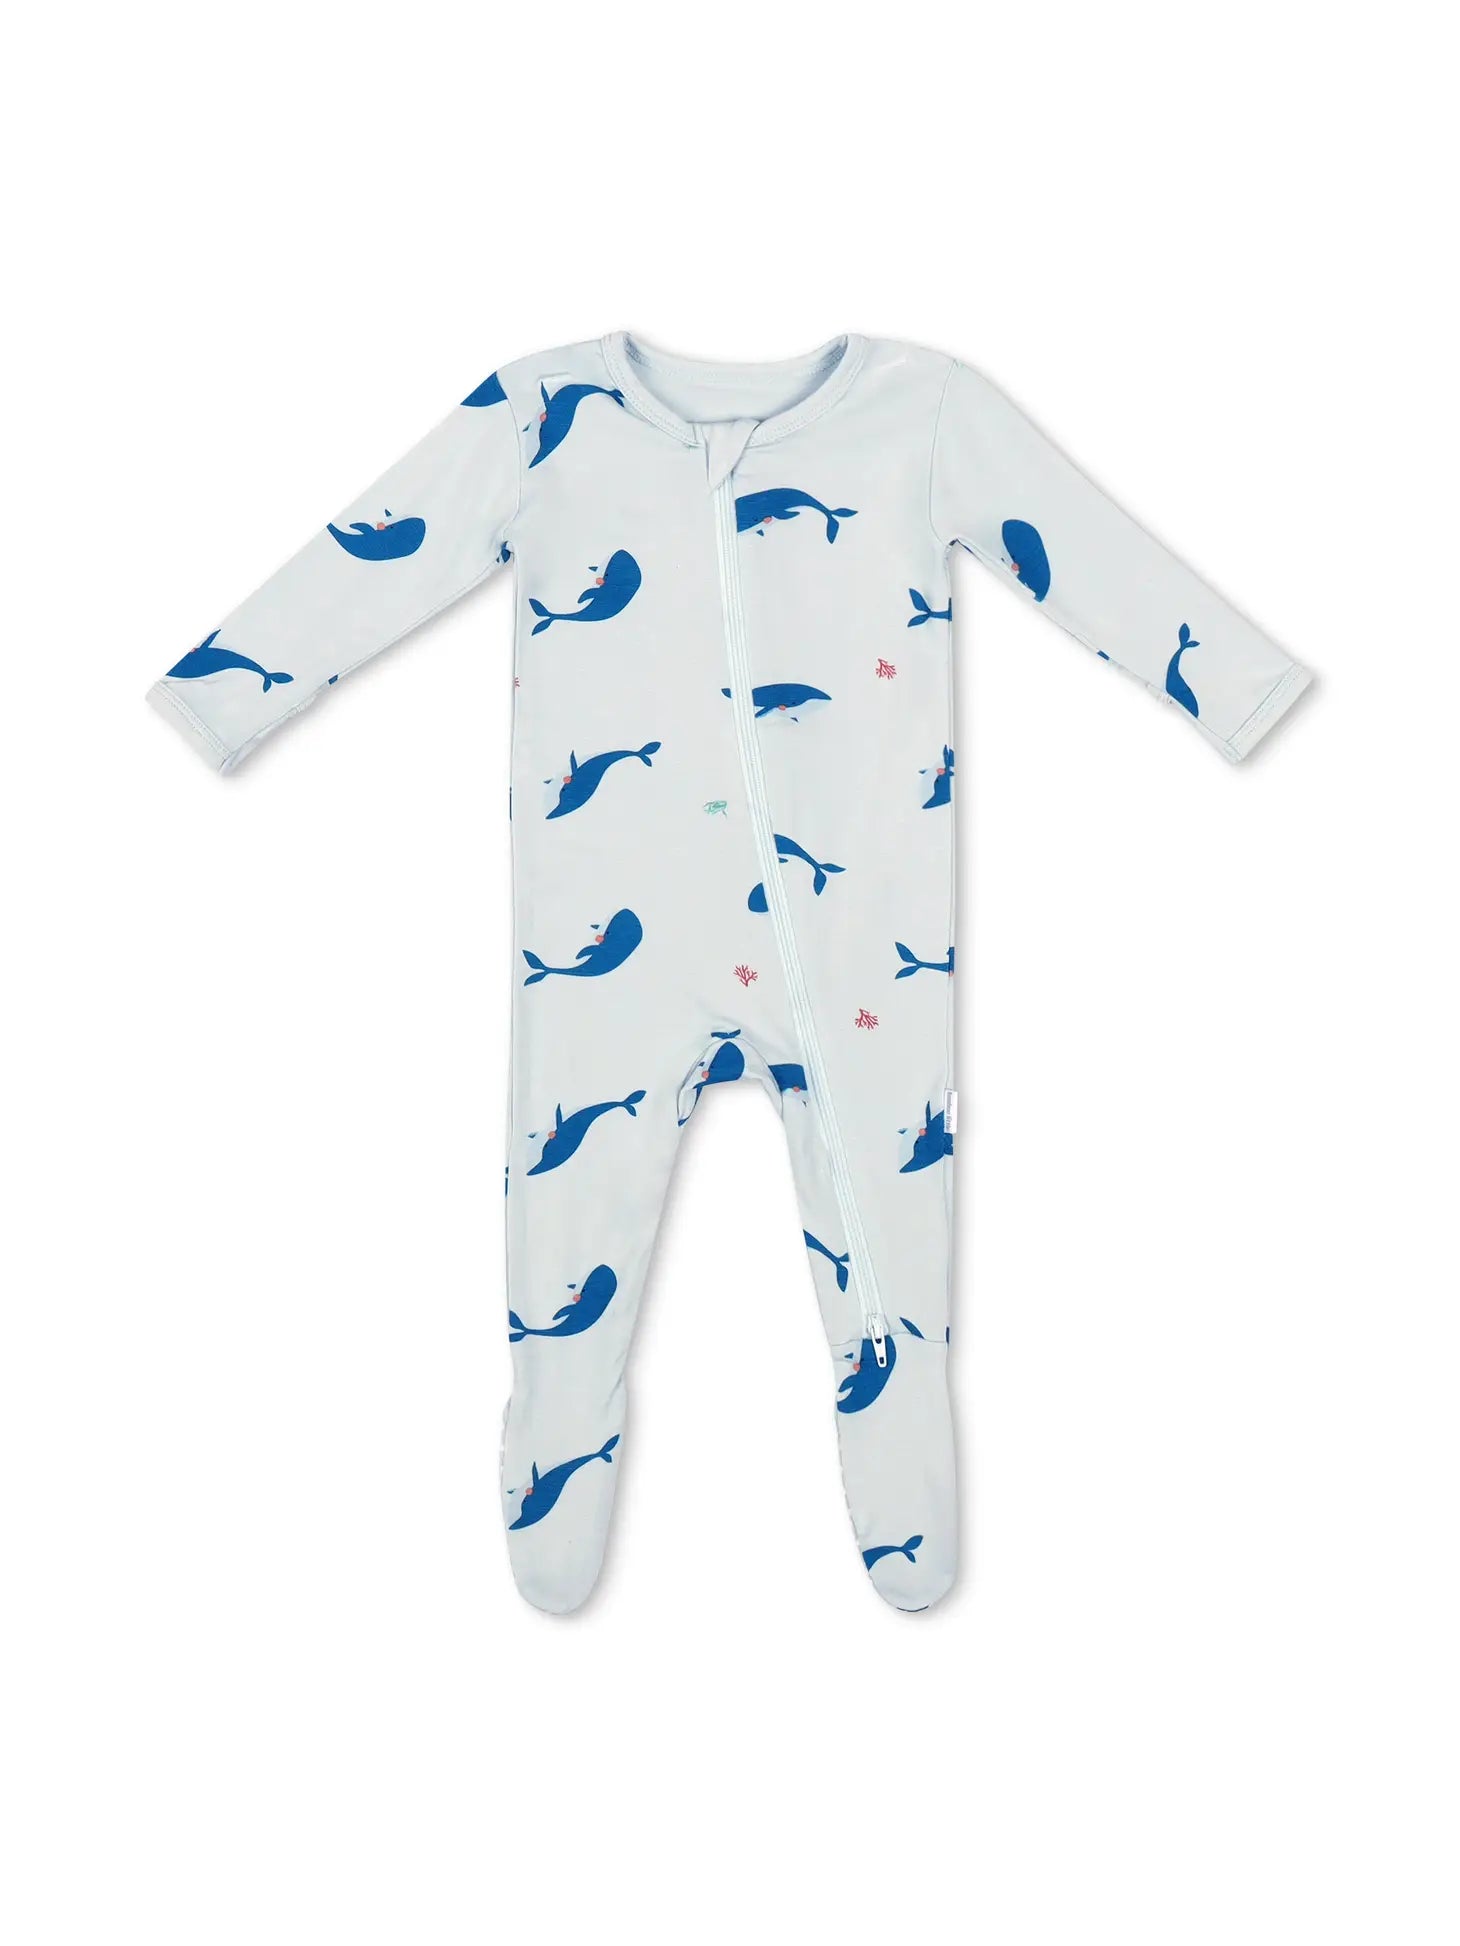 Whale Zippered Footie - Lulie